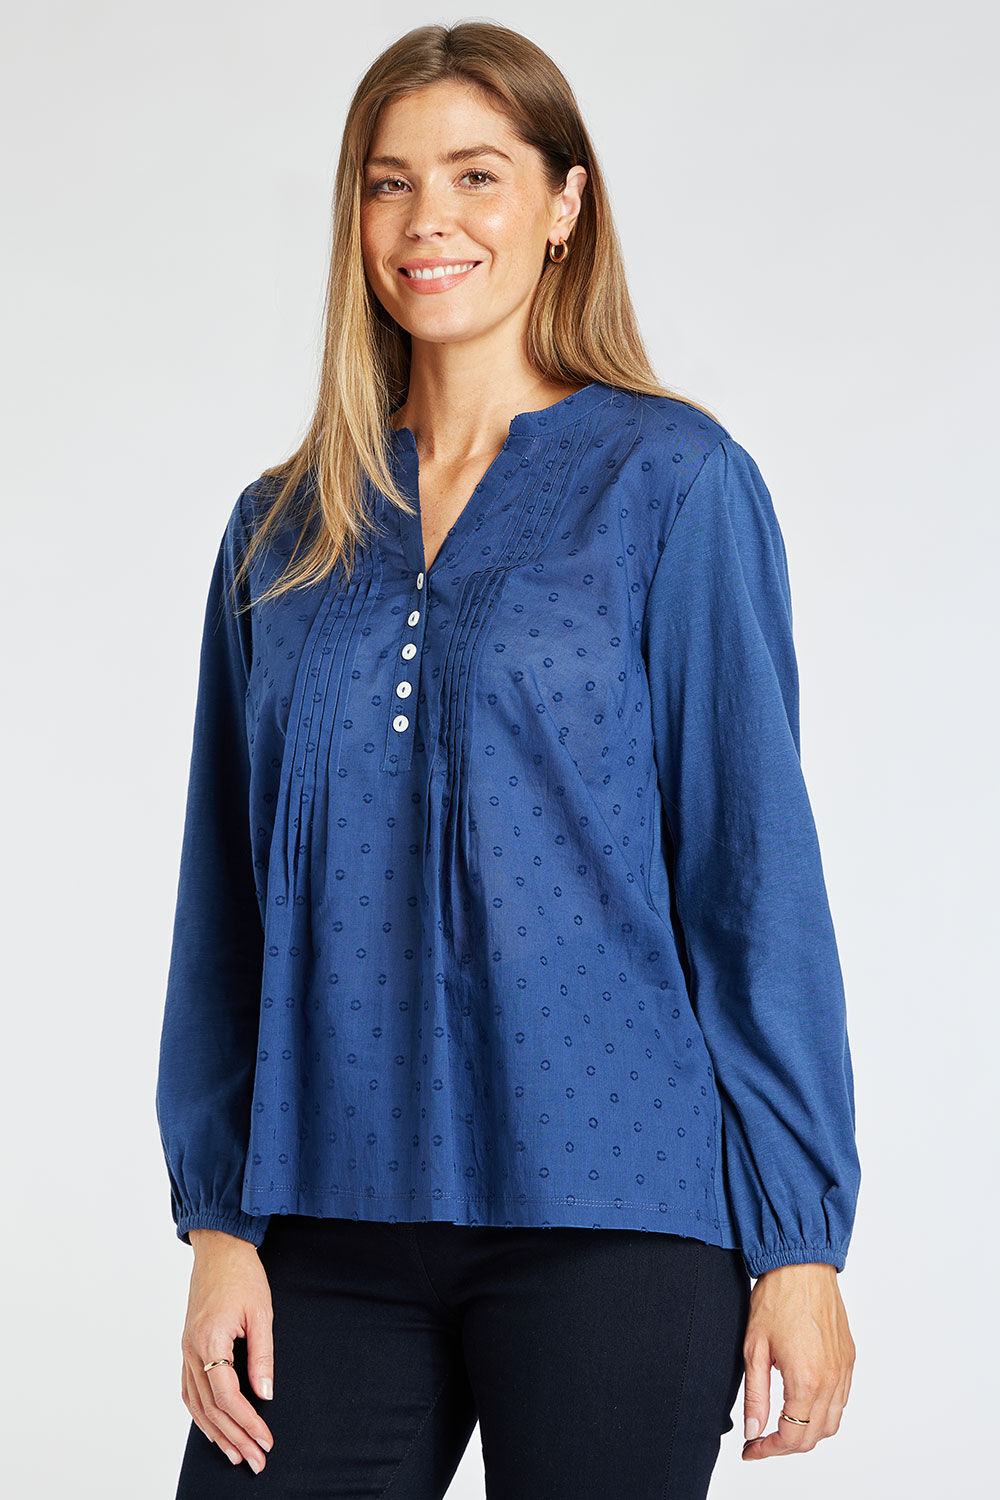 Bonmarche Women’s Navy Blue Cotton Dobby Woven 3/4 Sleeve Front Style Pintuck Blouse, Size: 10